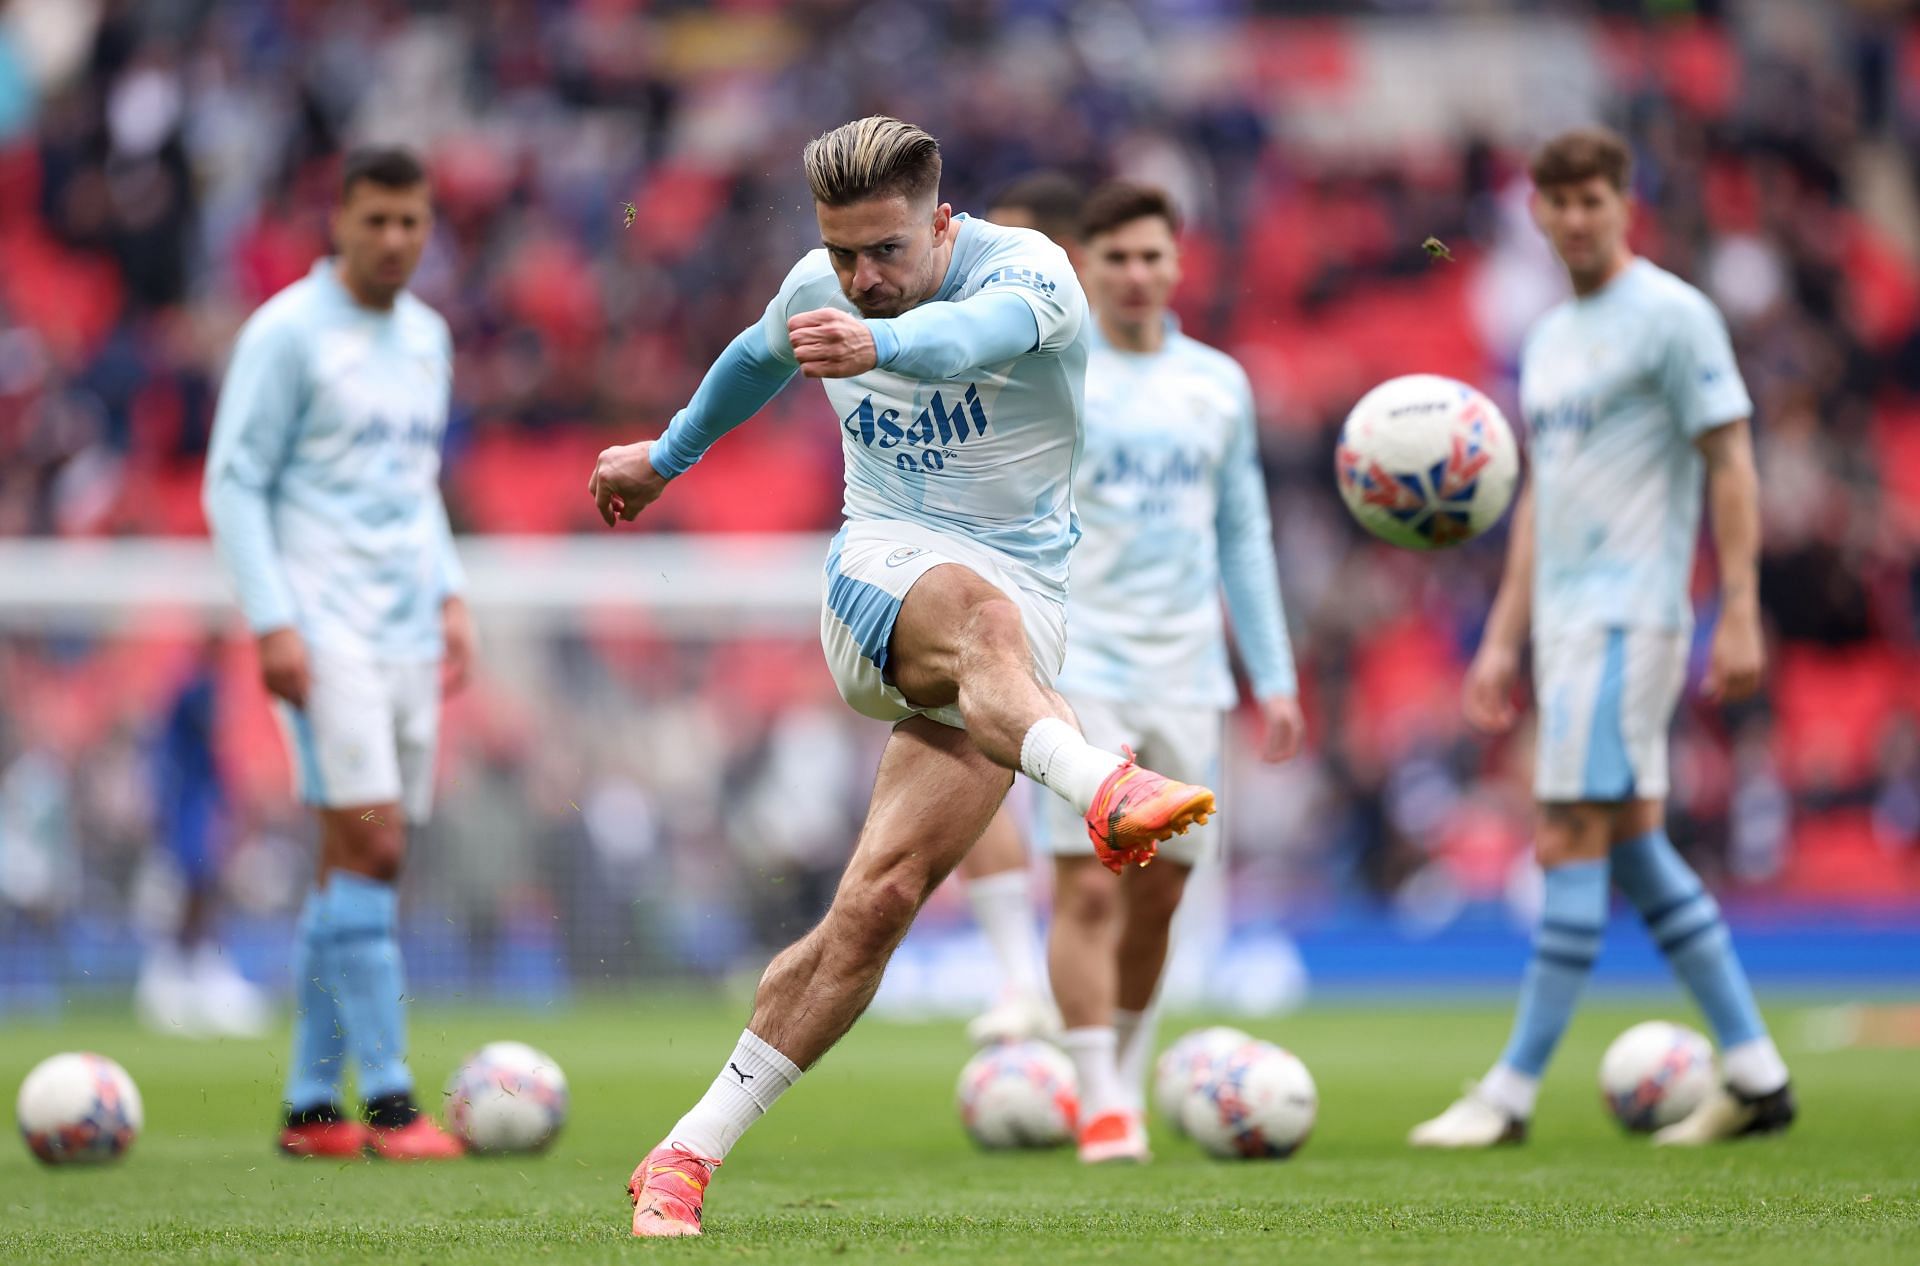 Jack Grealish is unlikely to move to Stamford Bridge this summer